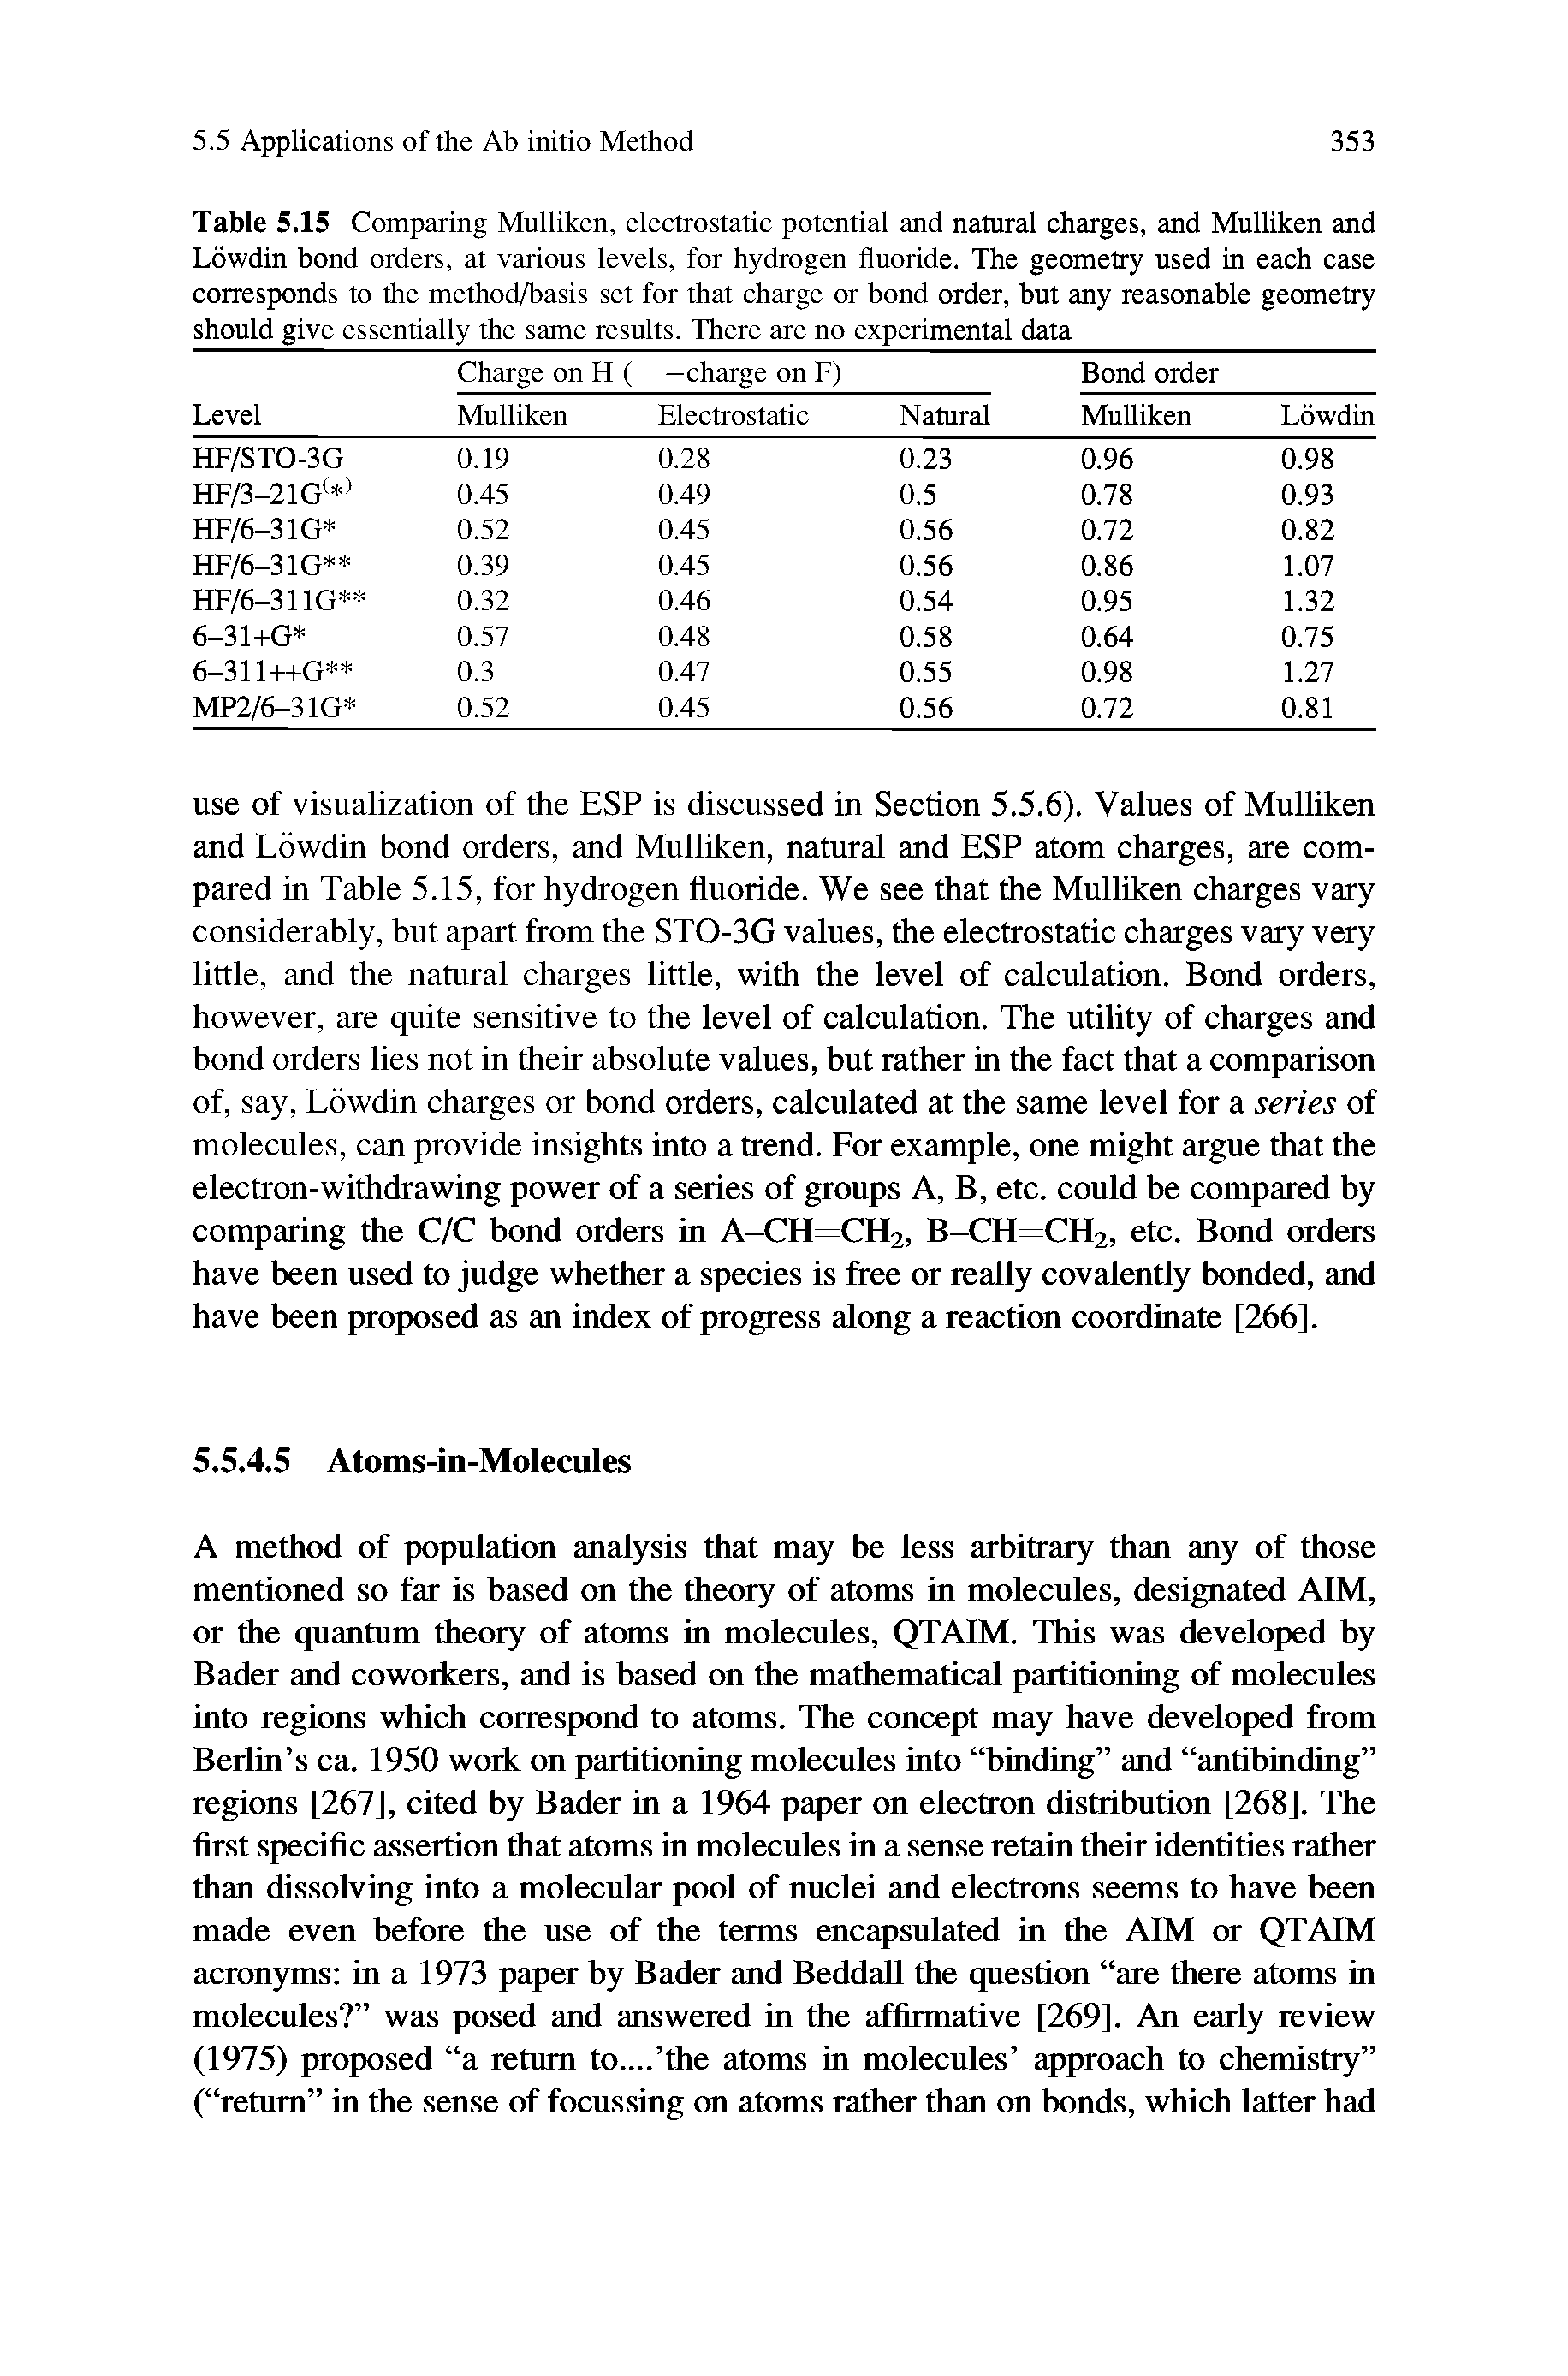 Table 5.15 Comparing Mulliken, electrostatic potential and natural charges, and Mulliken and Lowdin bond orders, at various levels, for hydrogen fluoride. The geometry used in each case corresponds to the method/basis set for that charge or bond order, but any reasonable geometry should give essentially the same results. There are no experimental data...